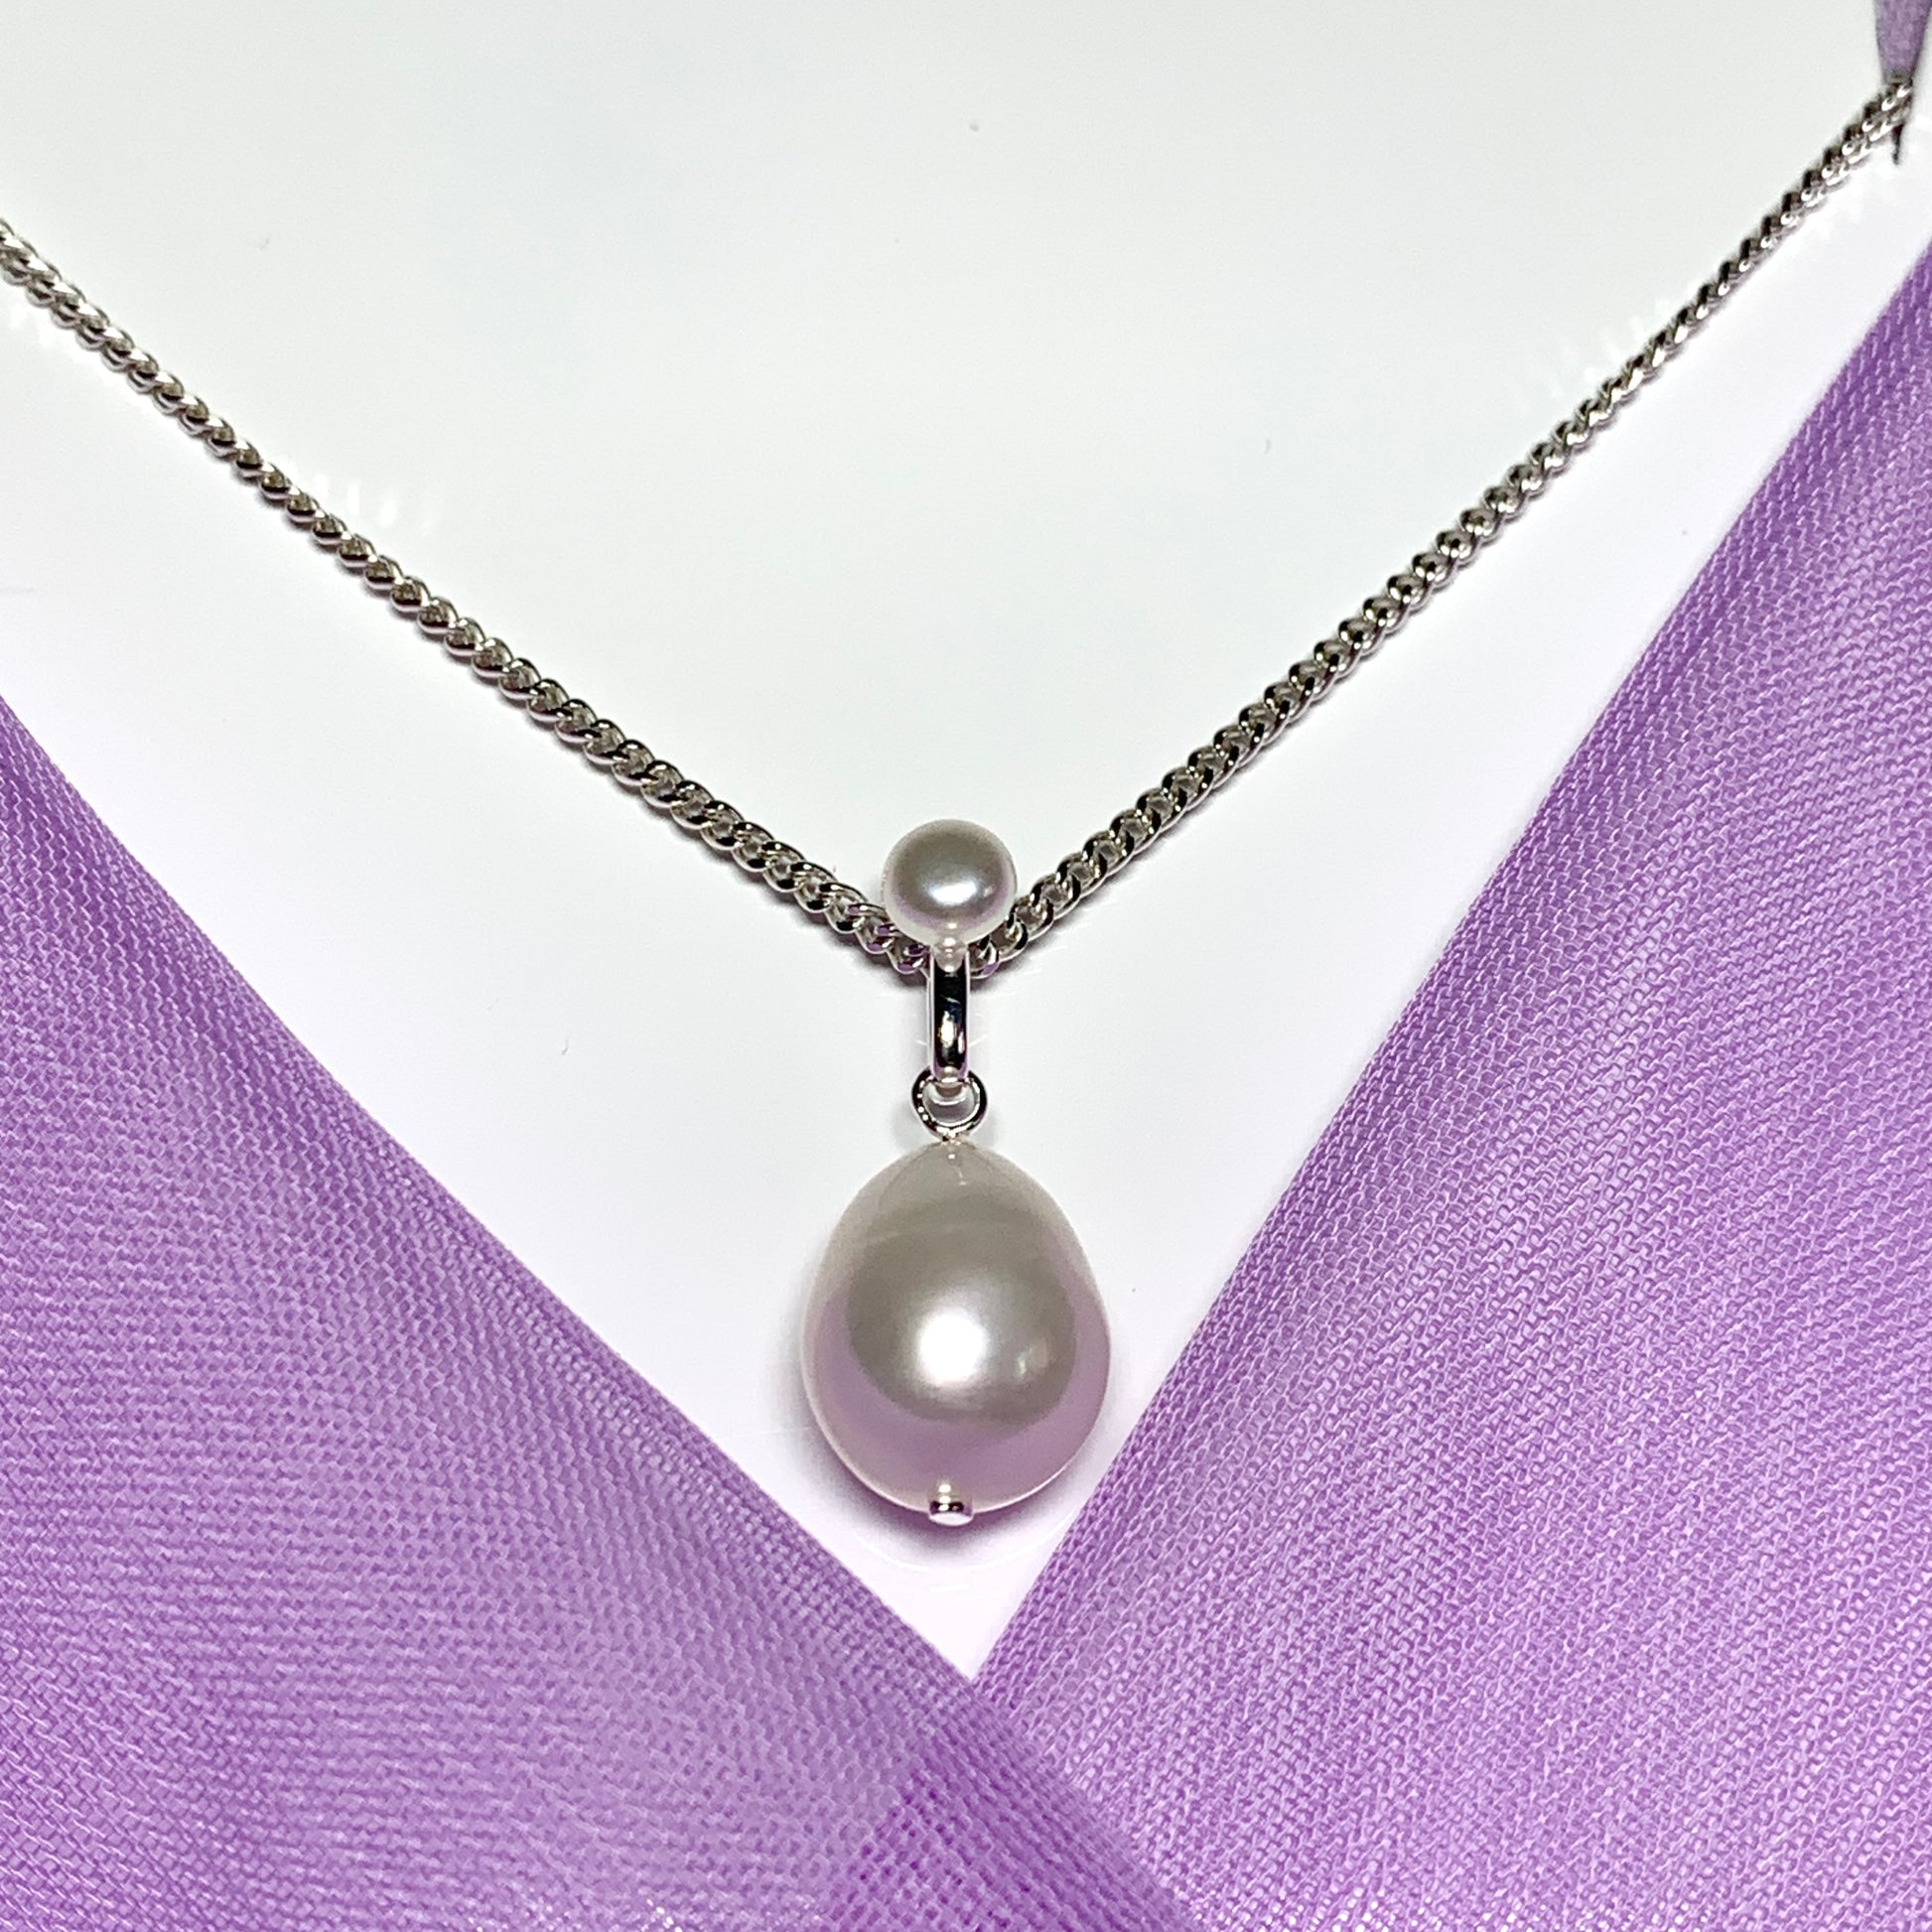 Real freshwater pearl double necklace